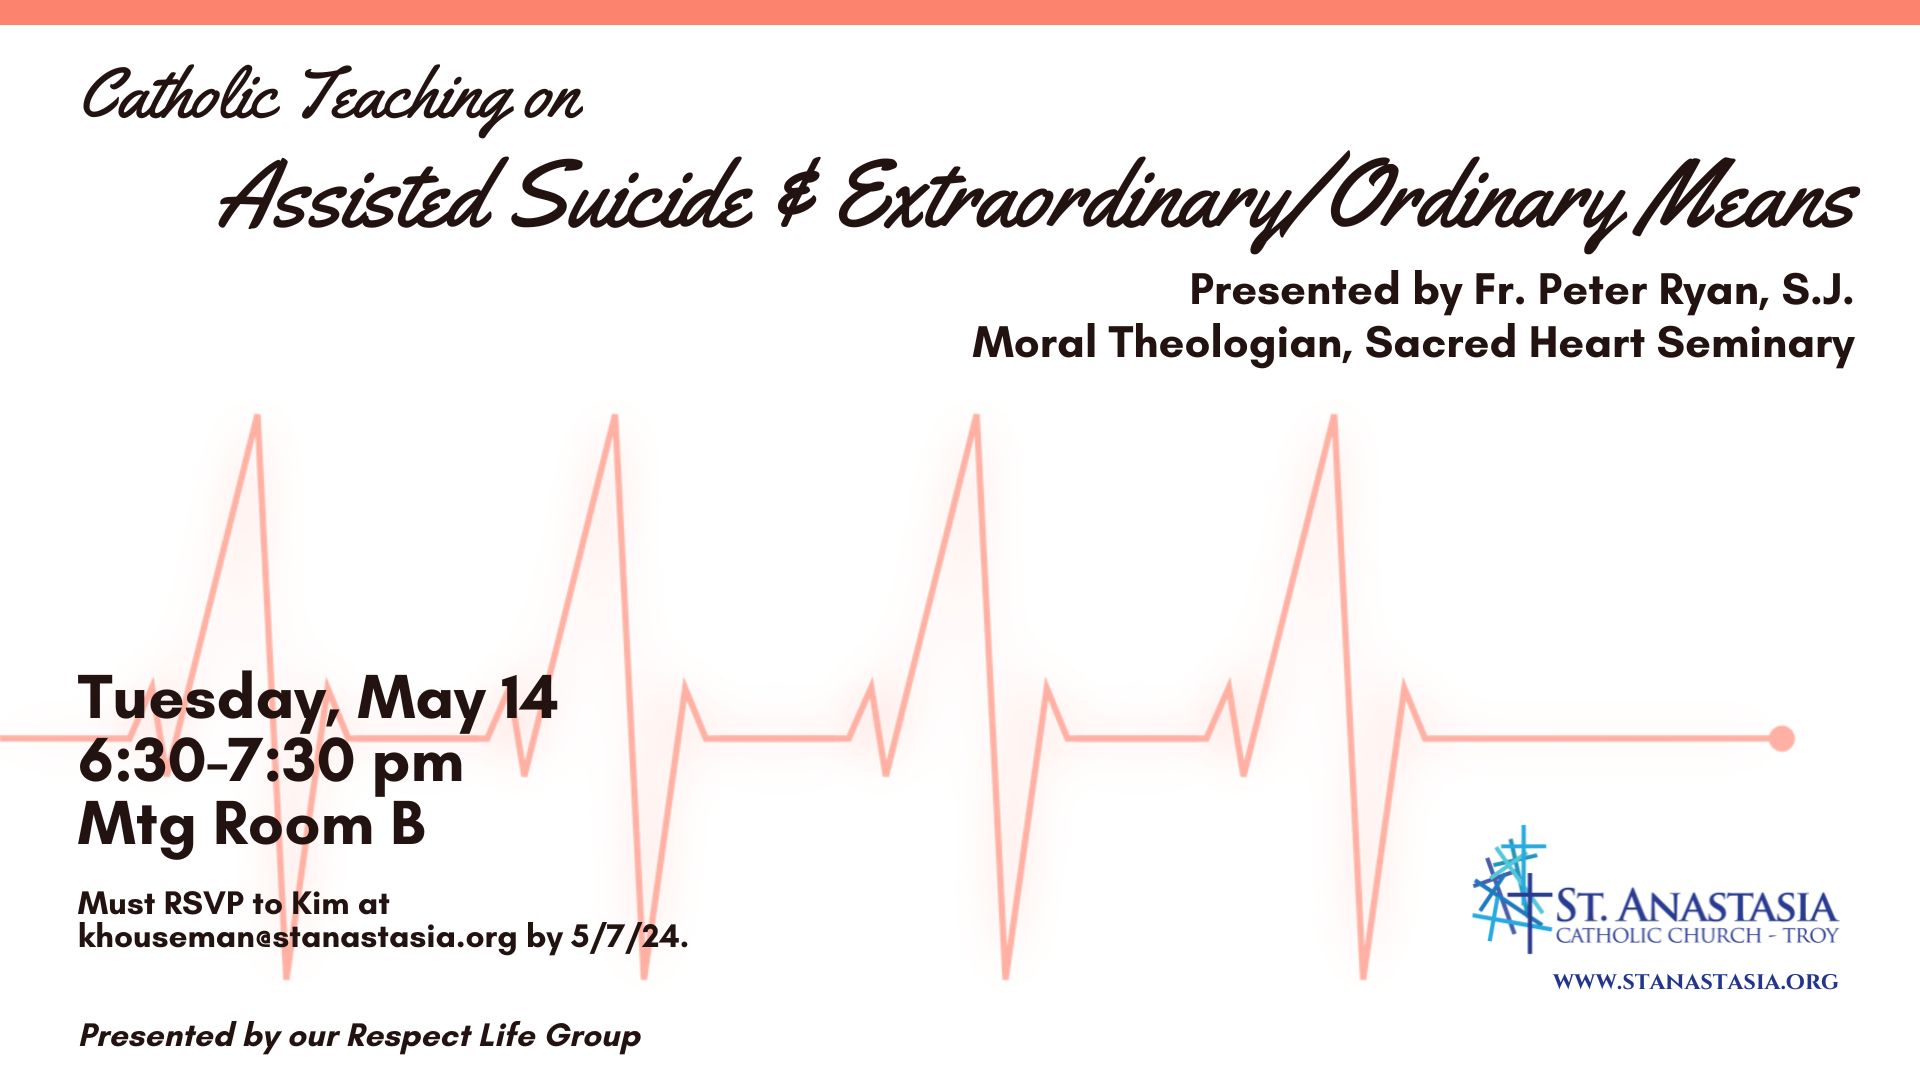 Catholic Teaching on Assisted Suicide & Extraordinary/Ordinary Means